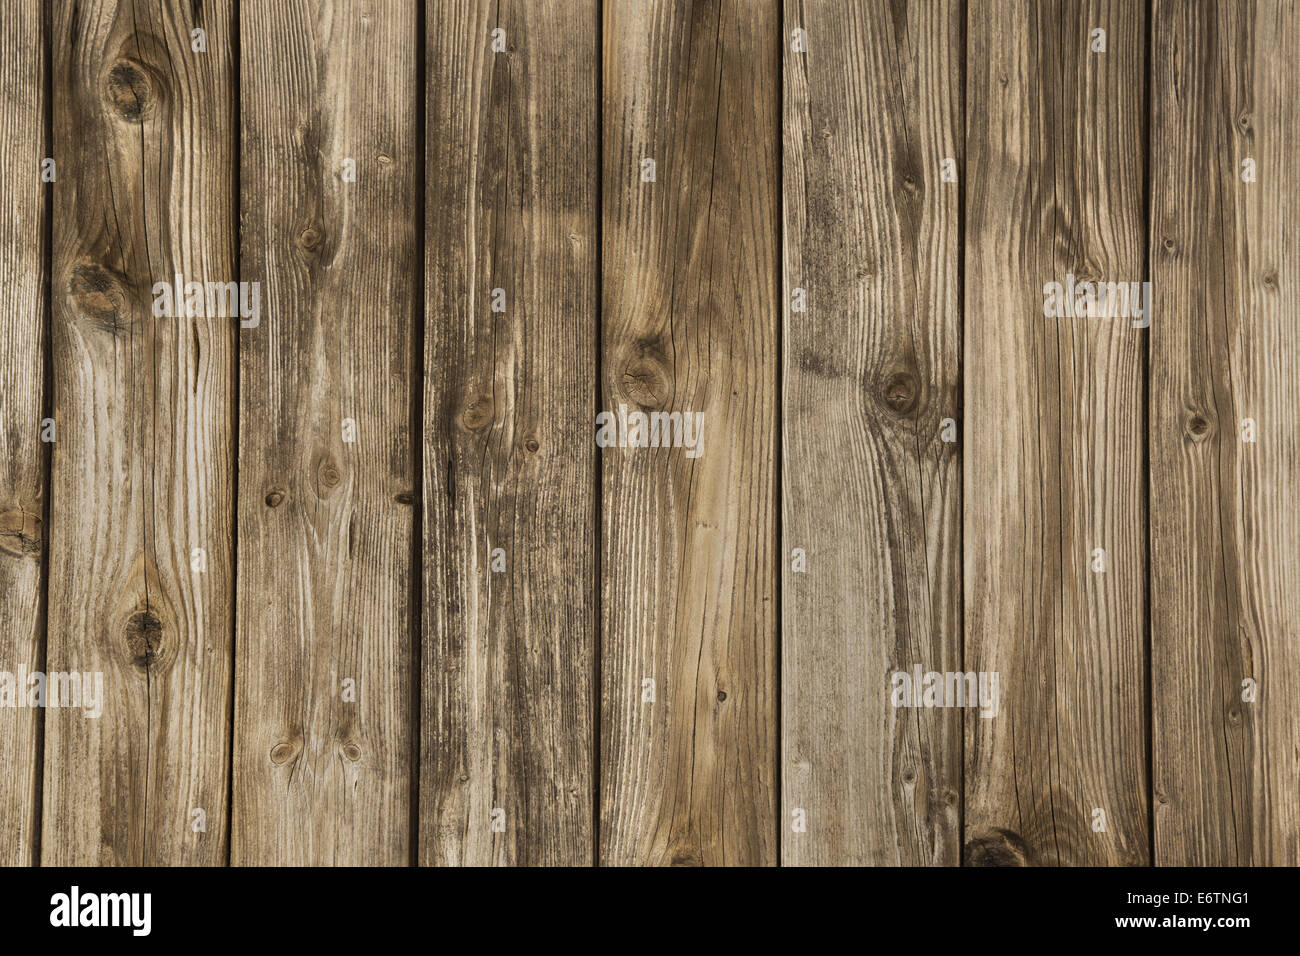 Old wooden natural background or texture in brown. Stock Photo